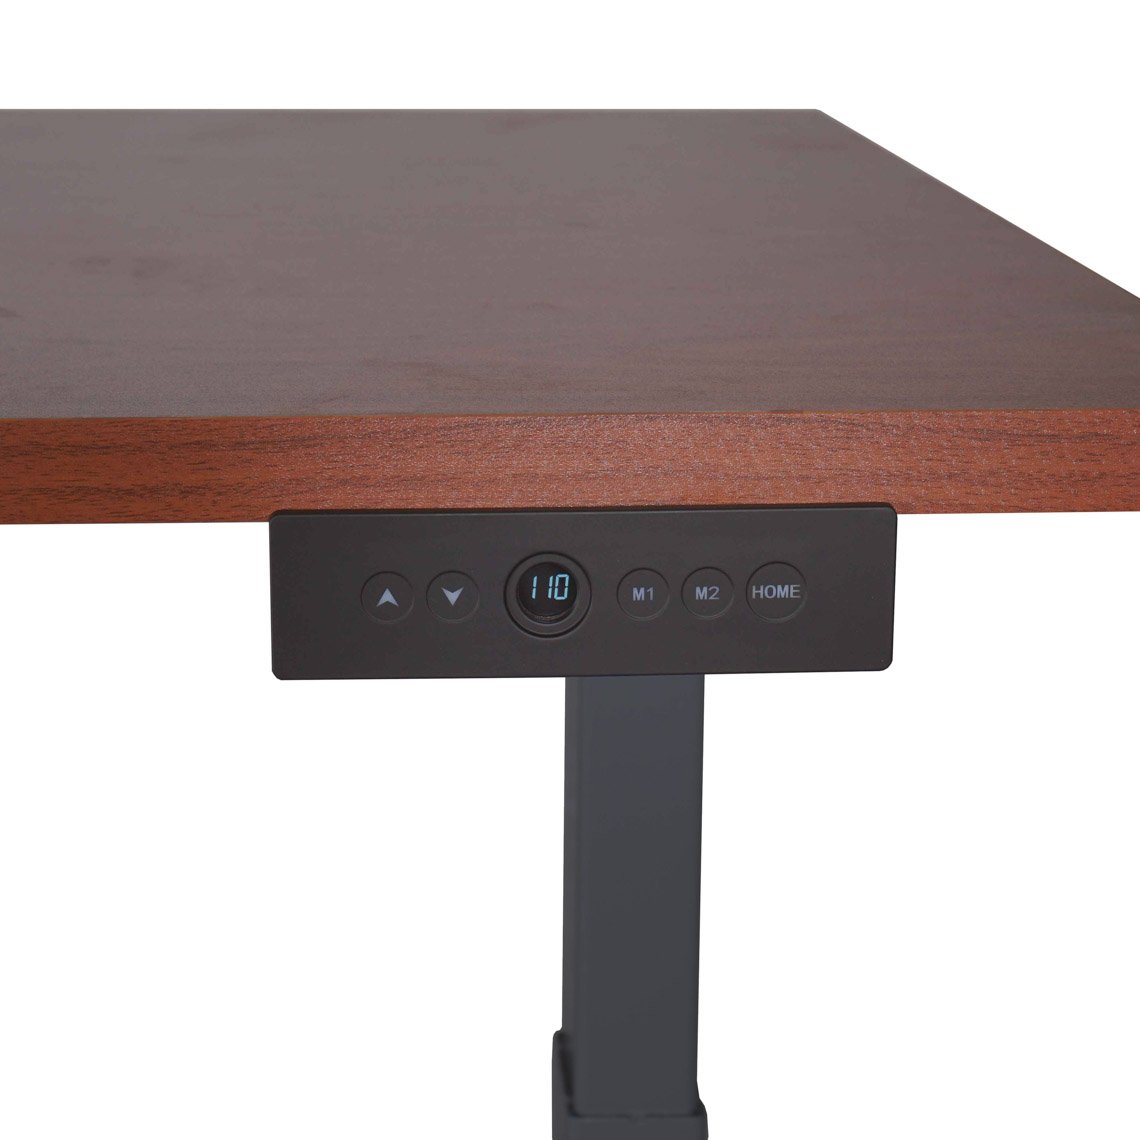 A6 Adjustable Sit To Stand Desk 24"- 50" w/ Wood 30" x 48" Top - view 5